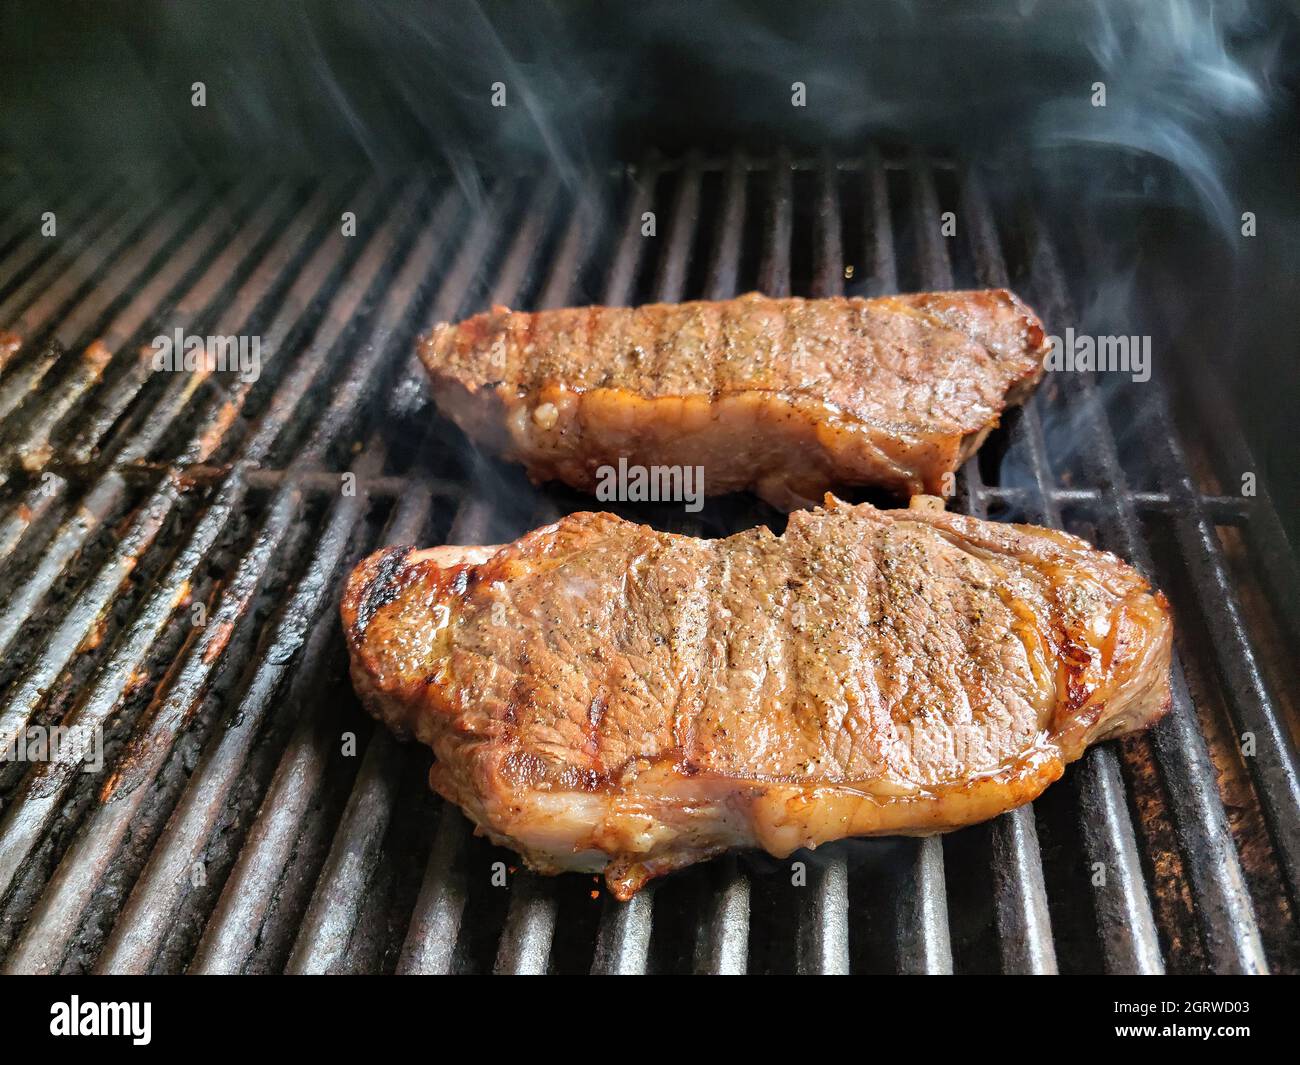 Beef sirloin steaks cooking on a barbeque grill Stock Photo